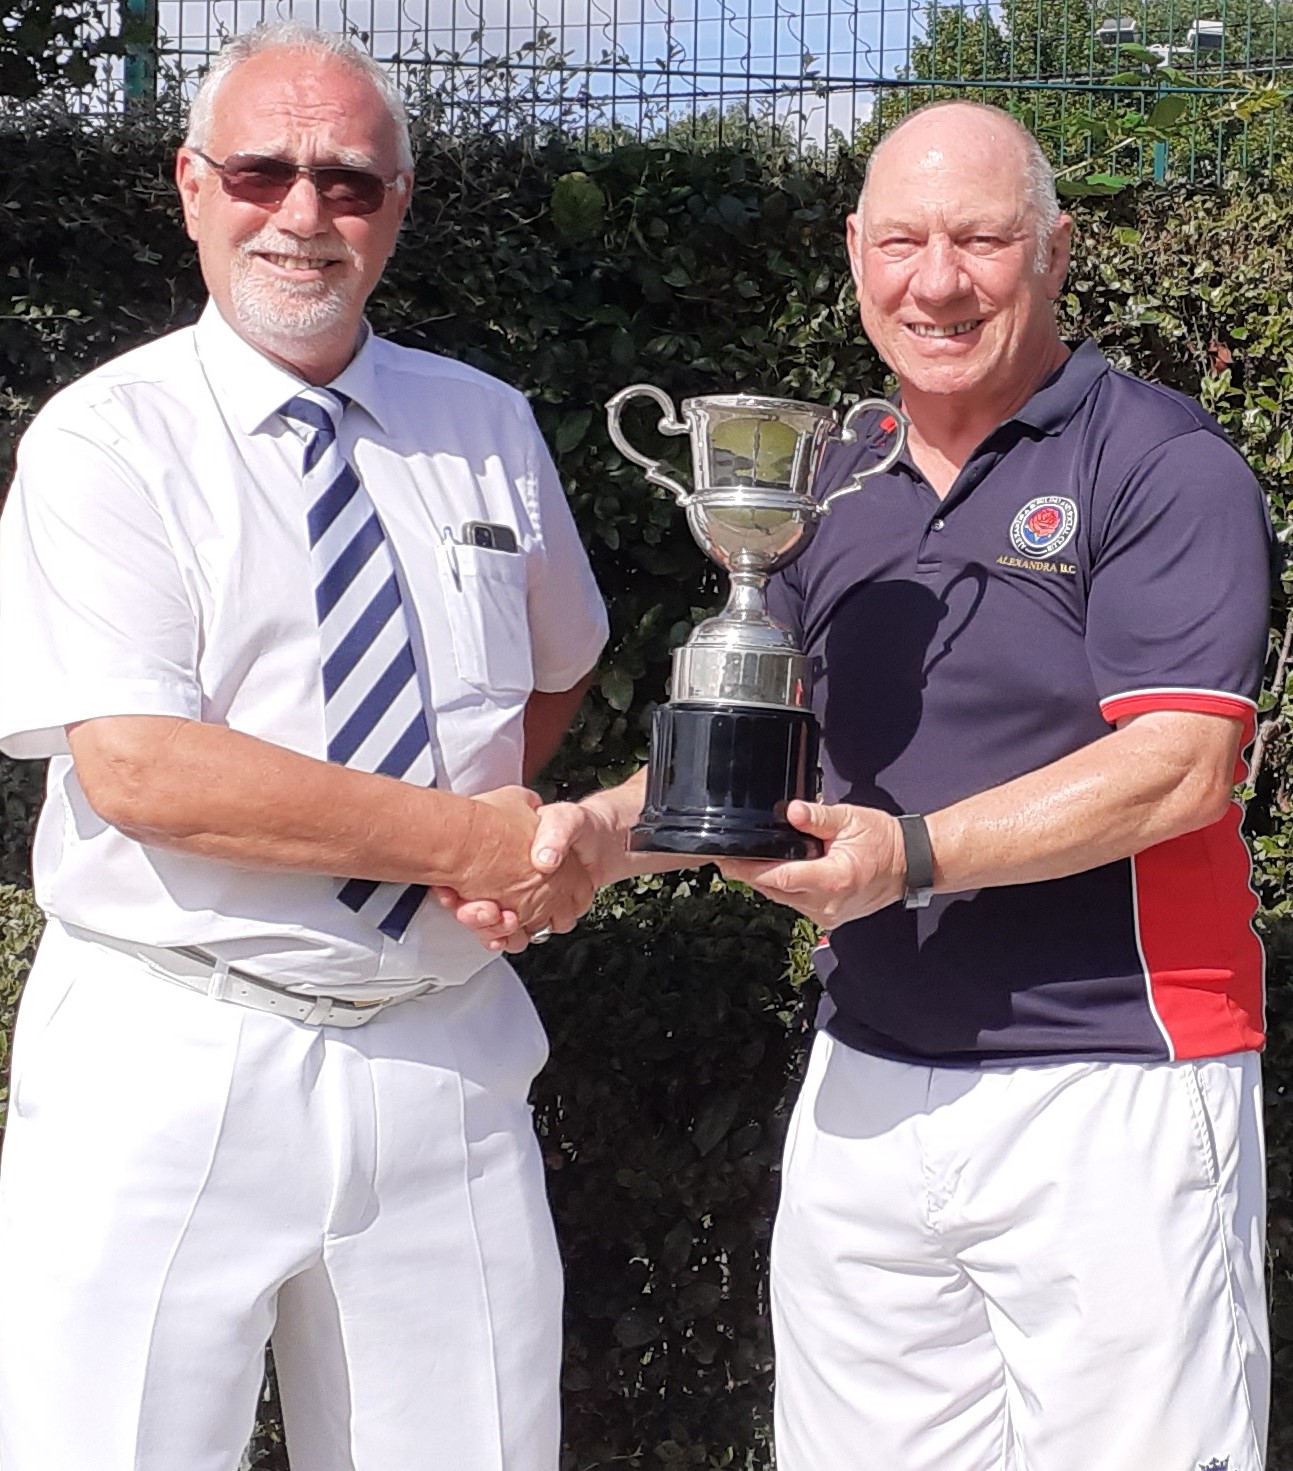 Simon Batcheler, Acting P&D Competitions Secretary, presents the Champion of Champions Trophy to Jamie Cook